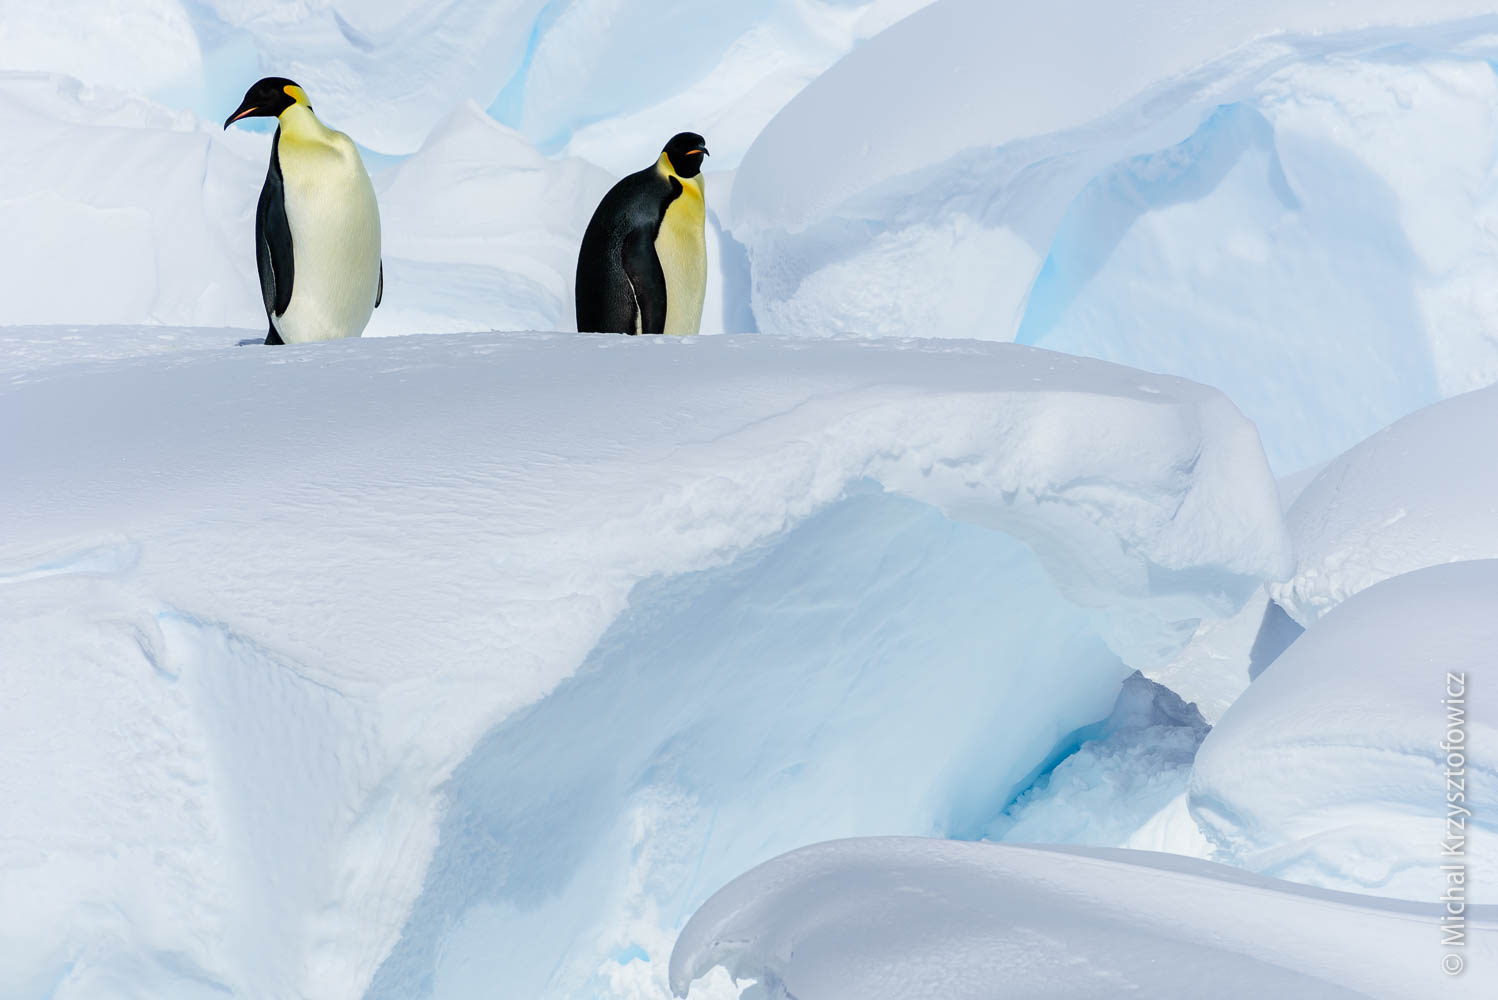 Another trip to Emperor Penguins